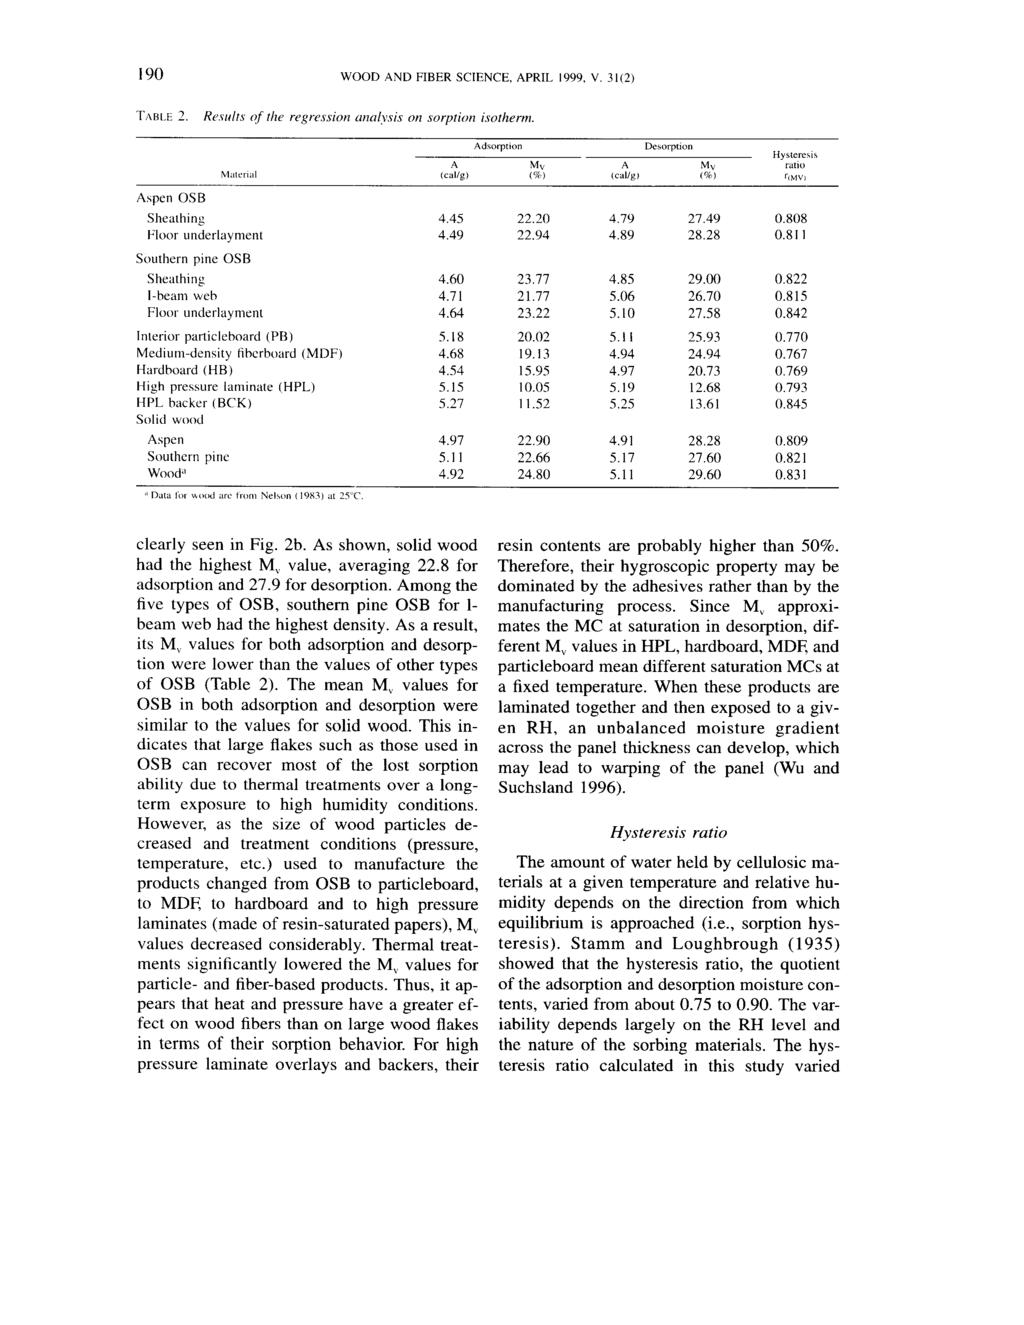 190 WOOD AND FIBER SCIENCE, APRIL 1999, V. 3 l(2) TABLE 2. Res~t1r.s of tlte regression analysis on sorption isotherm.